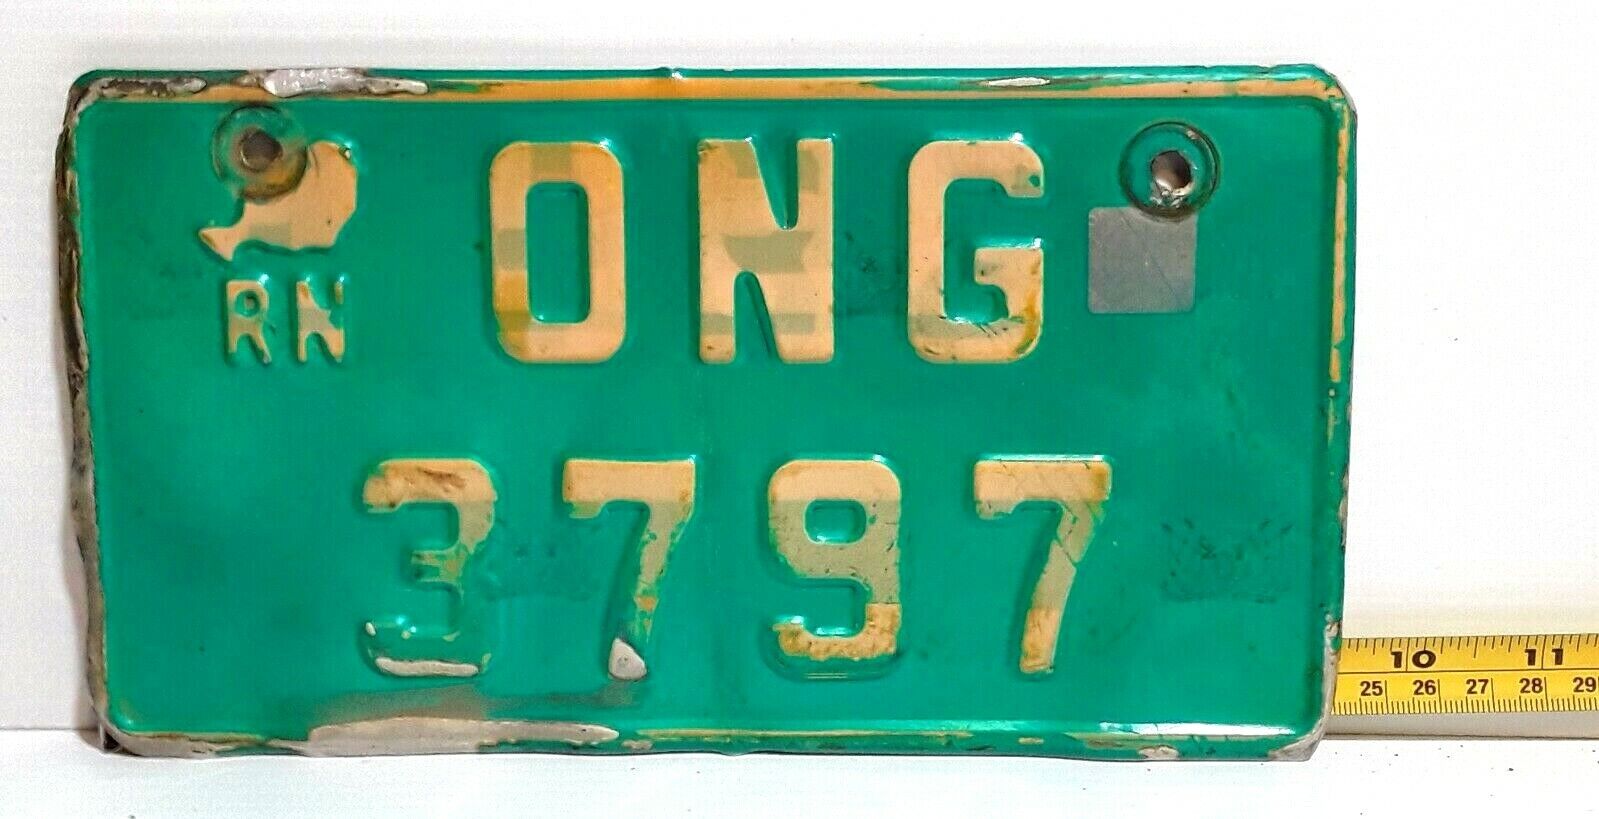 MOTORCYCLE - NIGER - 2009 Organisation Non Gouvernementale license plate - RARE